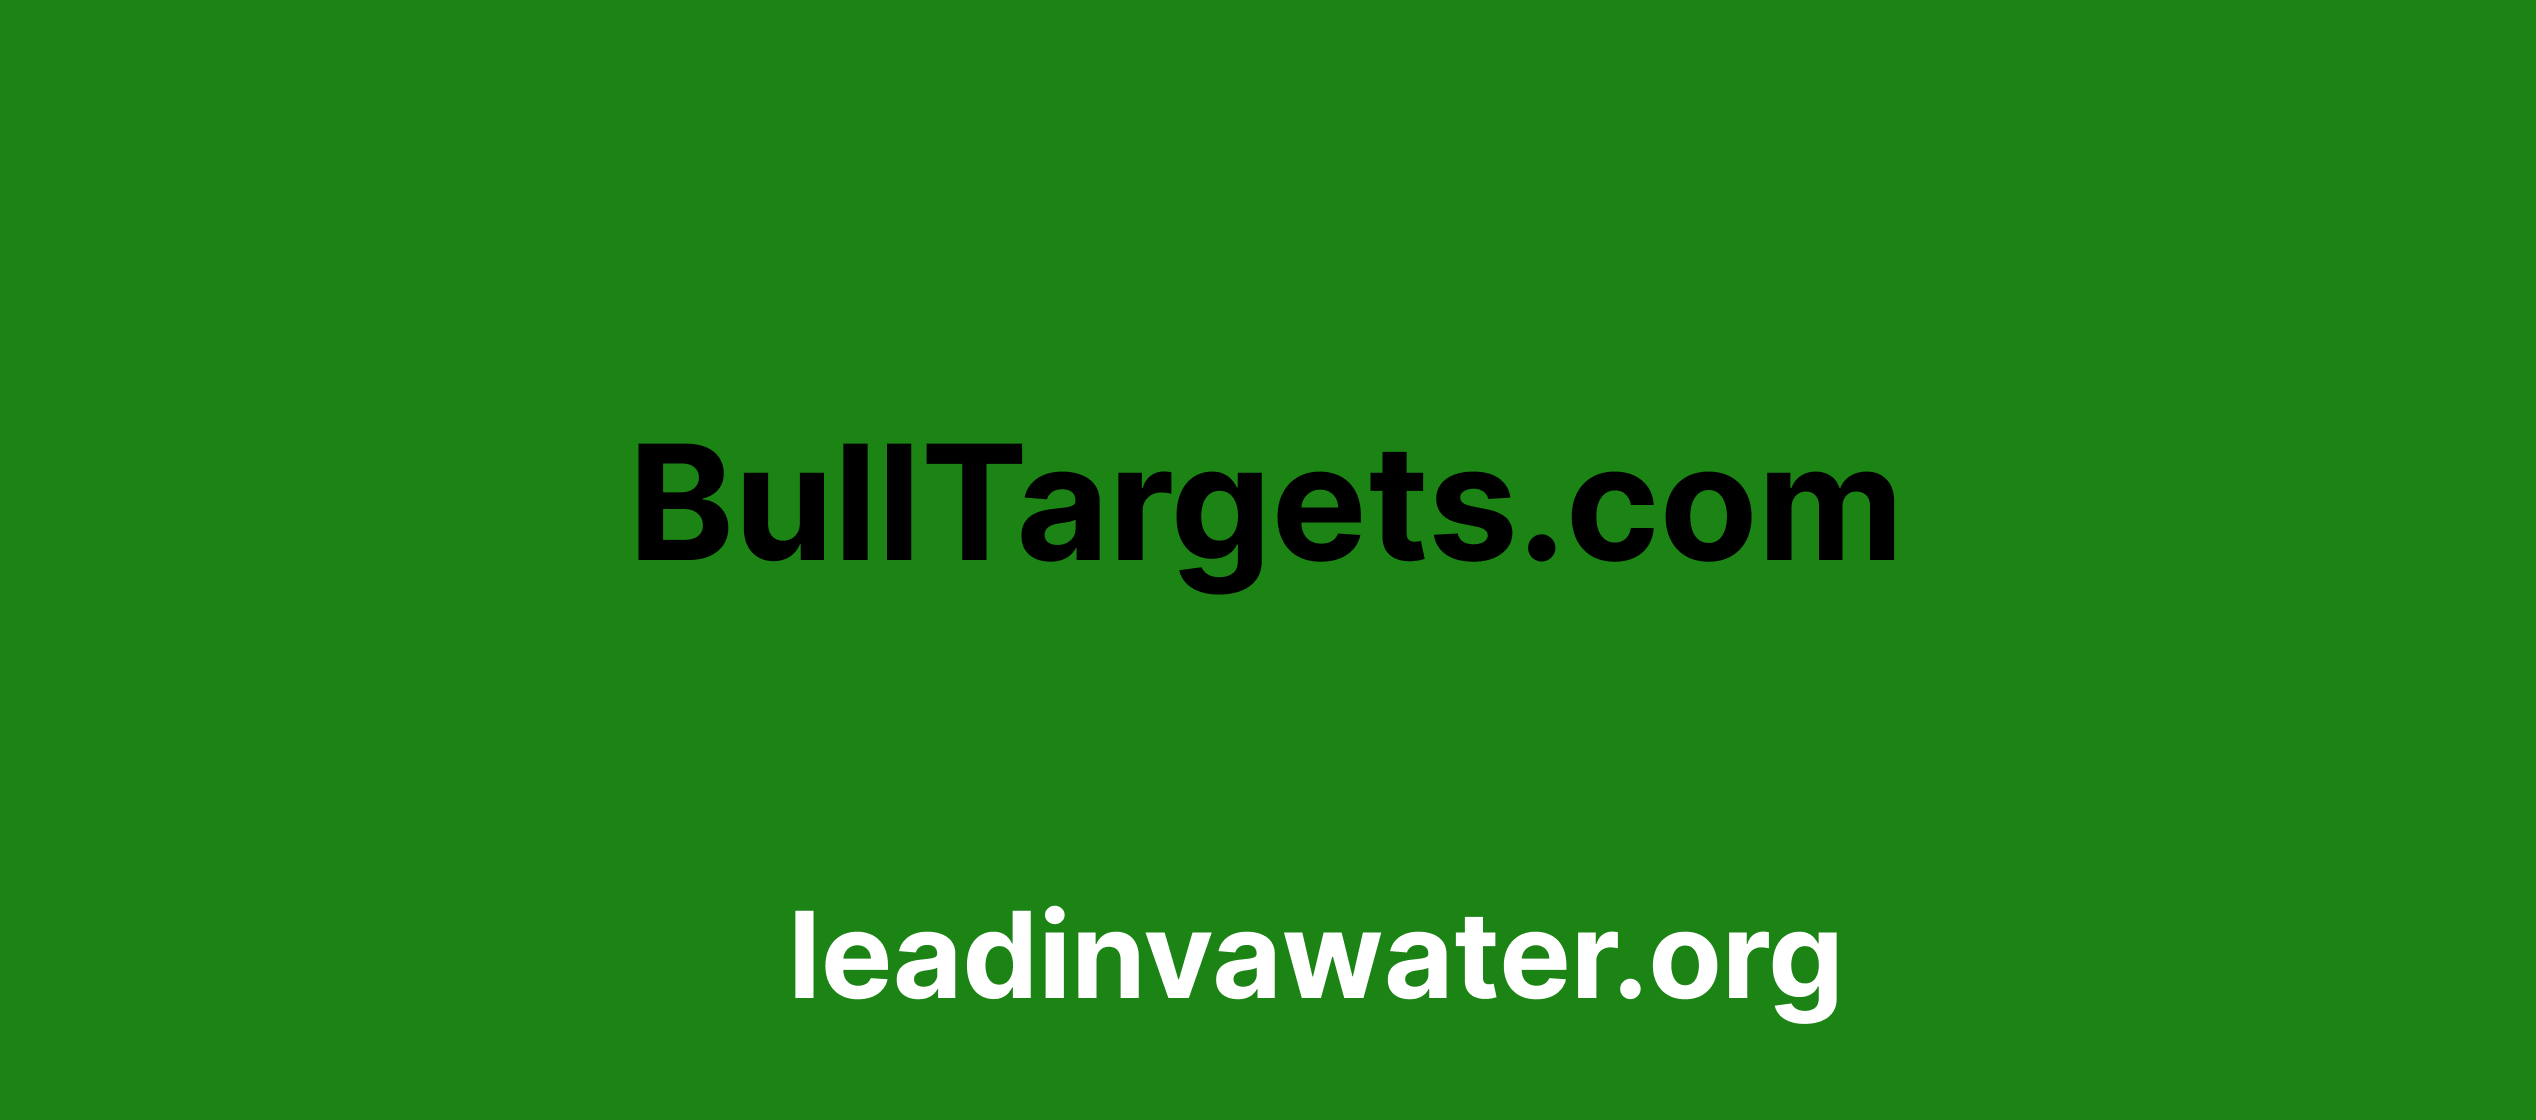 BullTargets.com review leadinvawater